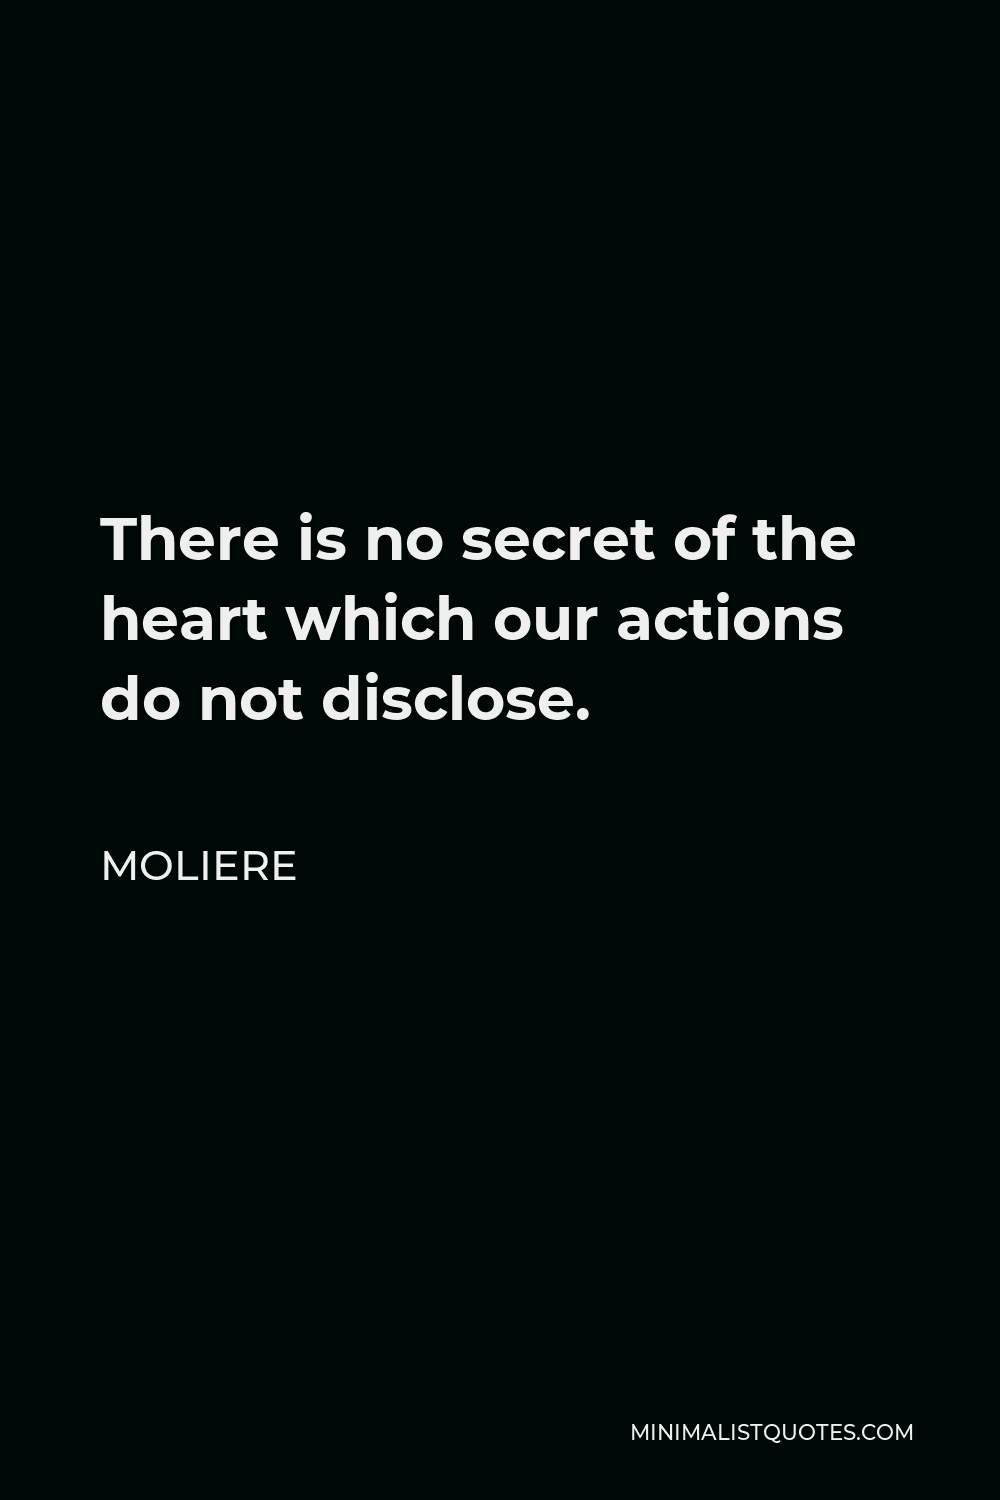 Moliere Quote - There is no secret of the heart which our actions do not disclose.